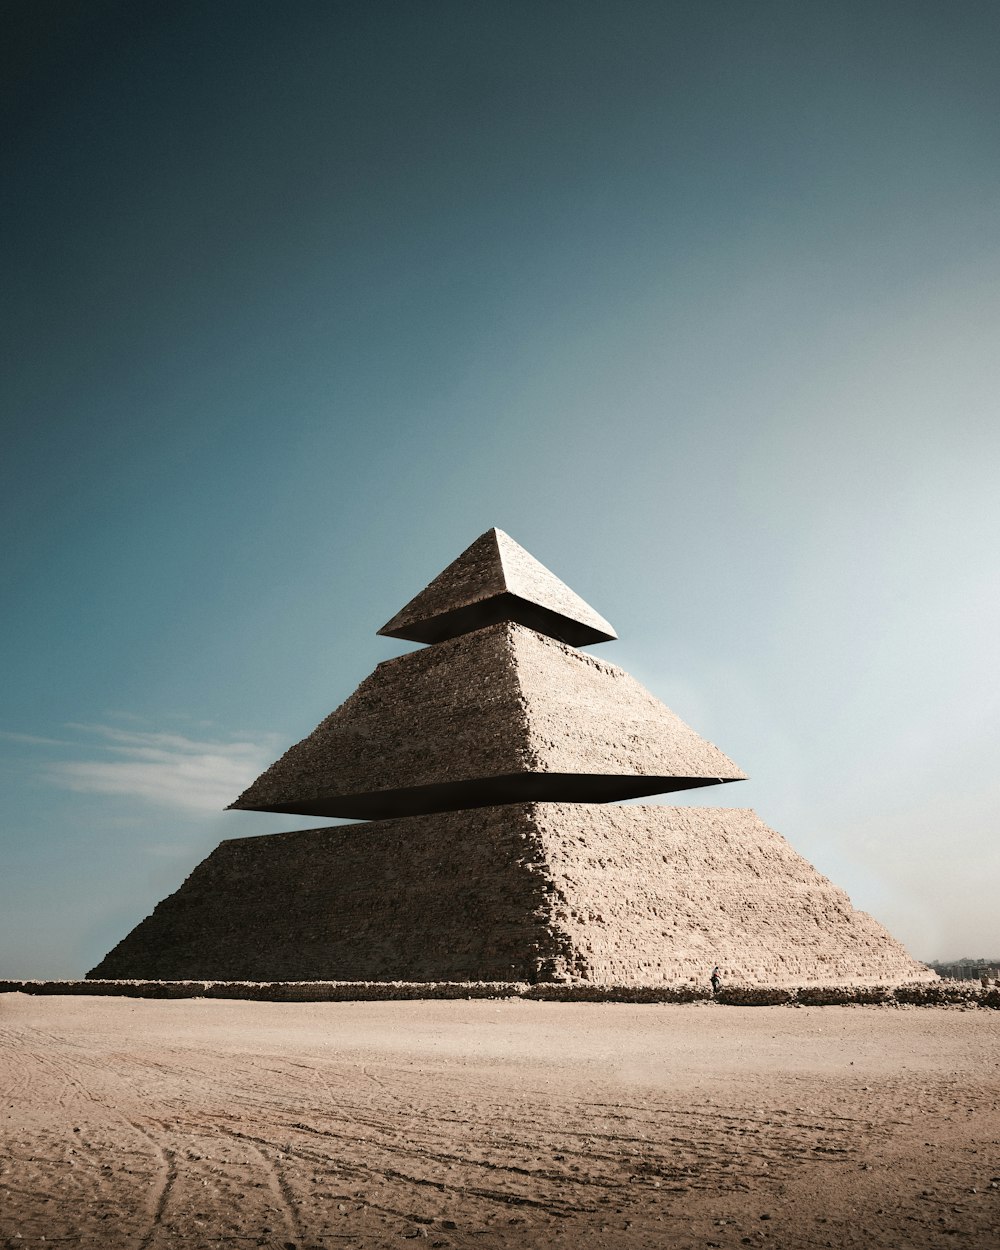 750+ Pyramid Pictures [HD] | Download Free Images on Unsplash